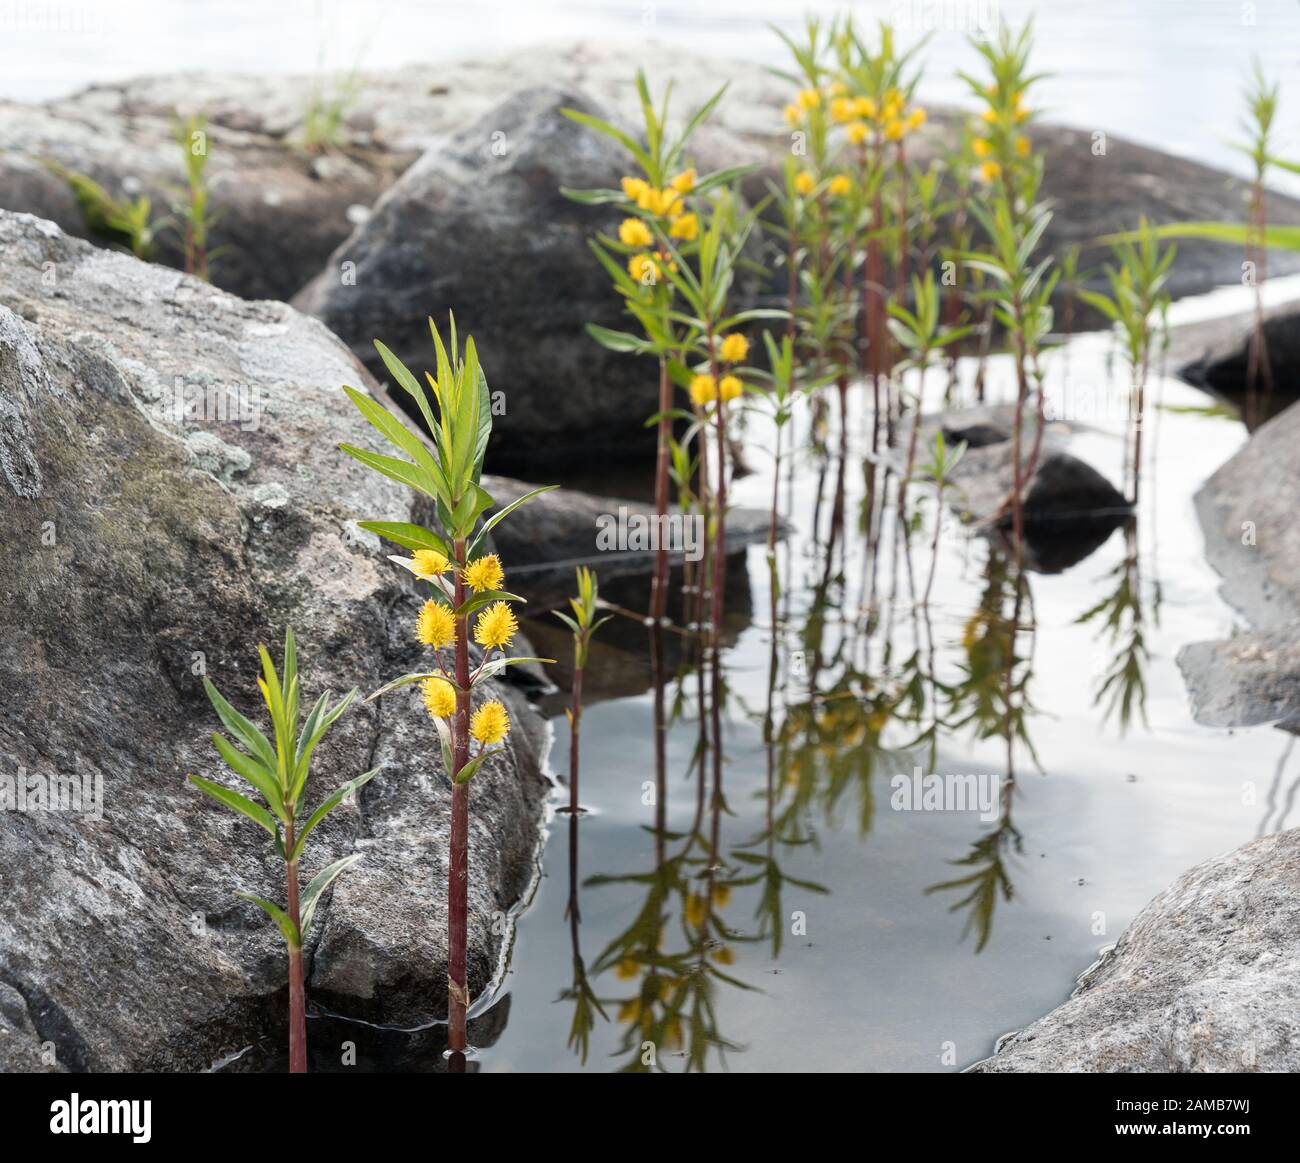 Tufted loosestrife plant growing in shallow water Stock Photo